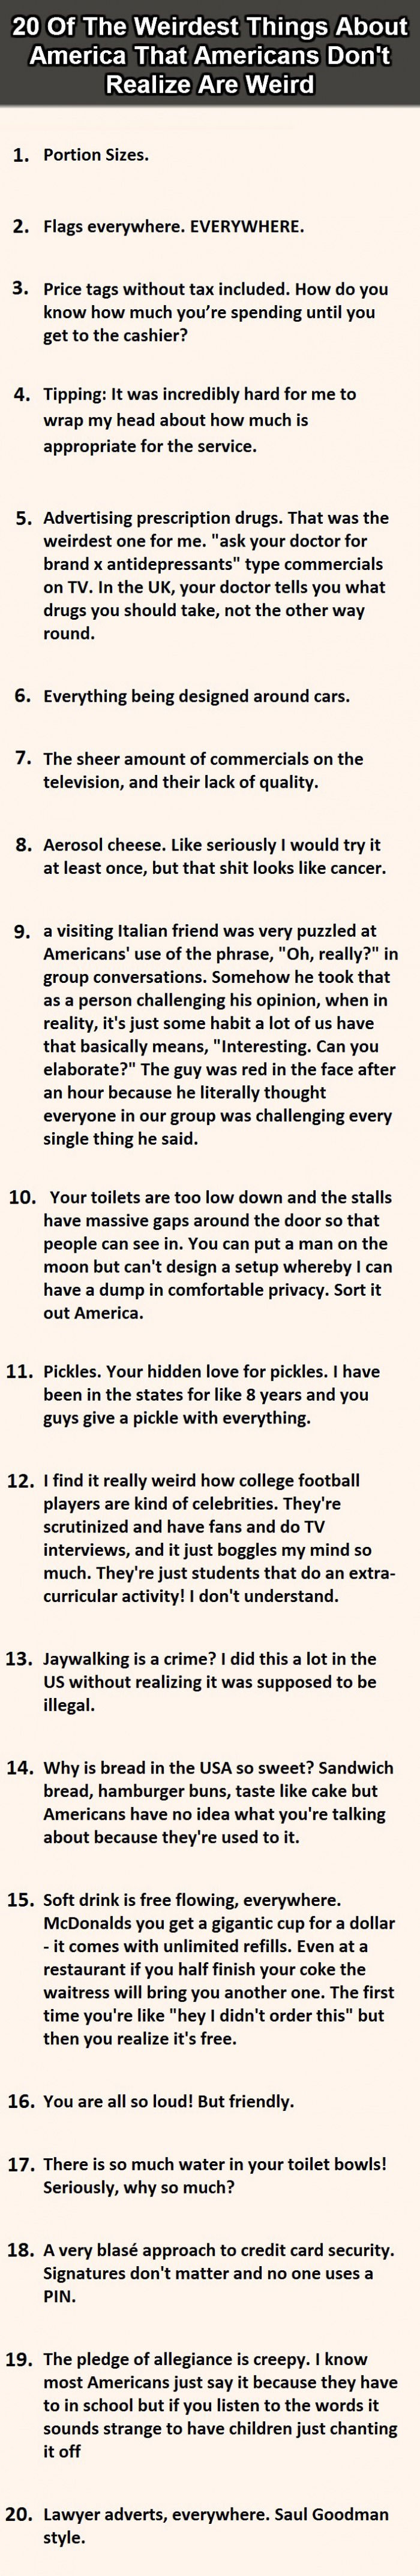 20 of the weirdest things about america that americans don't realize are weird, list